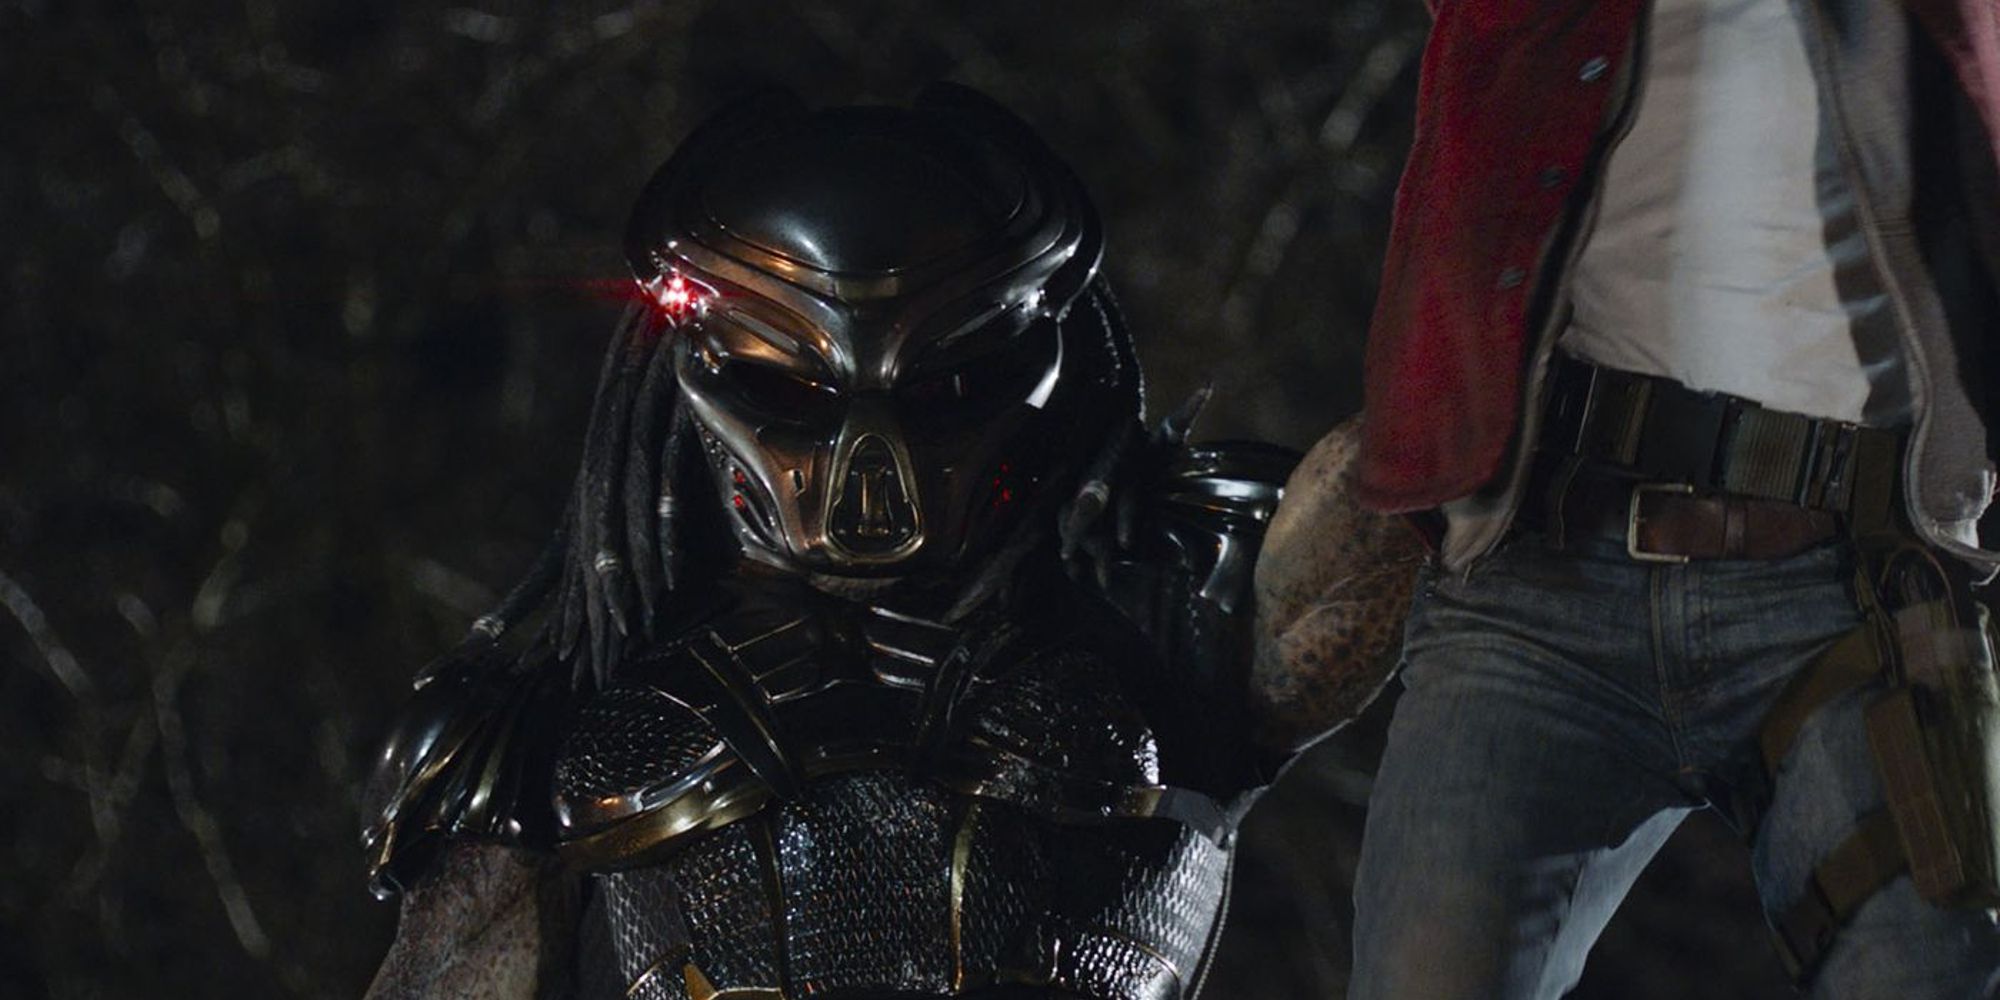 The Fugitive Predator holding up a victim in The Predator (2018)